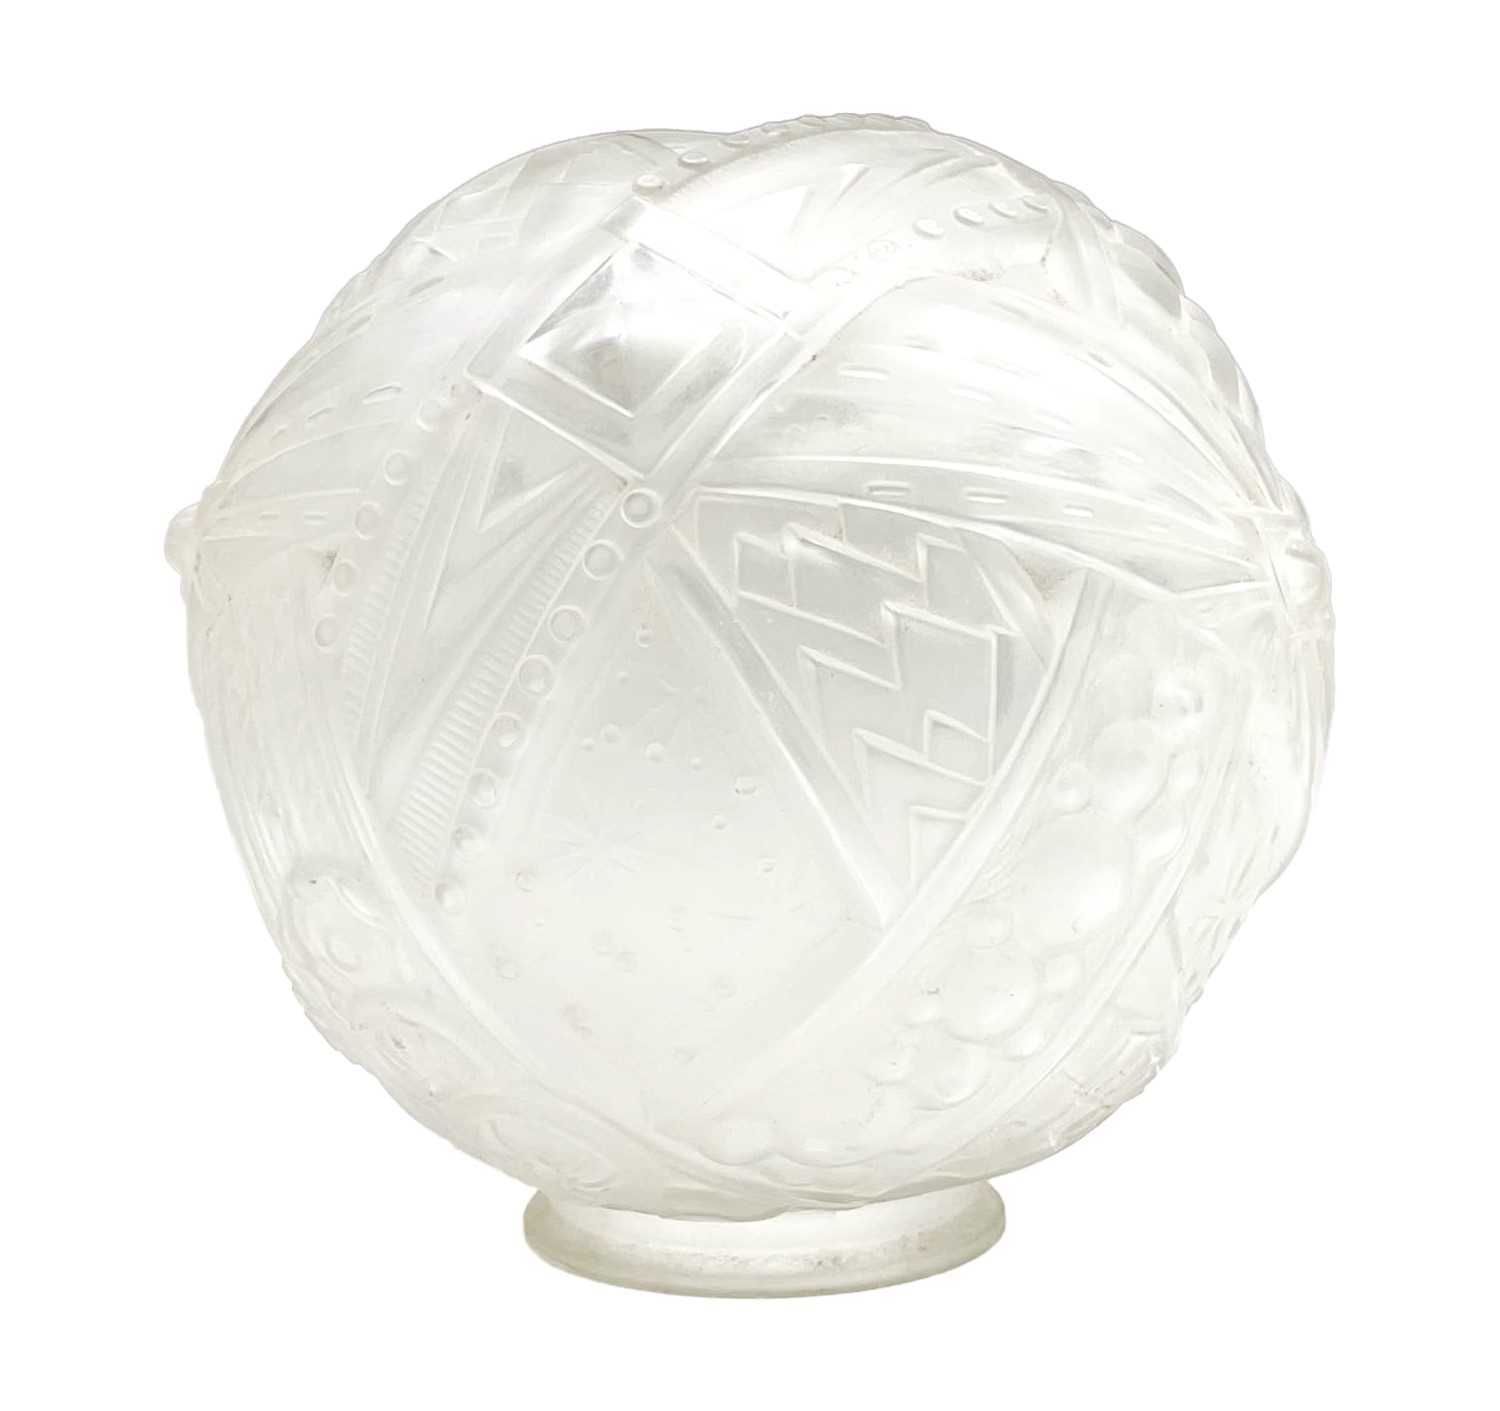 Lot 12 - A Muller Freres Luneville frosted glass globe.